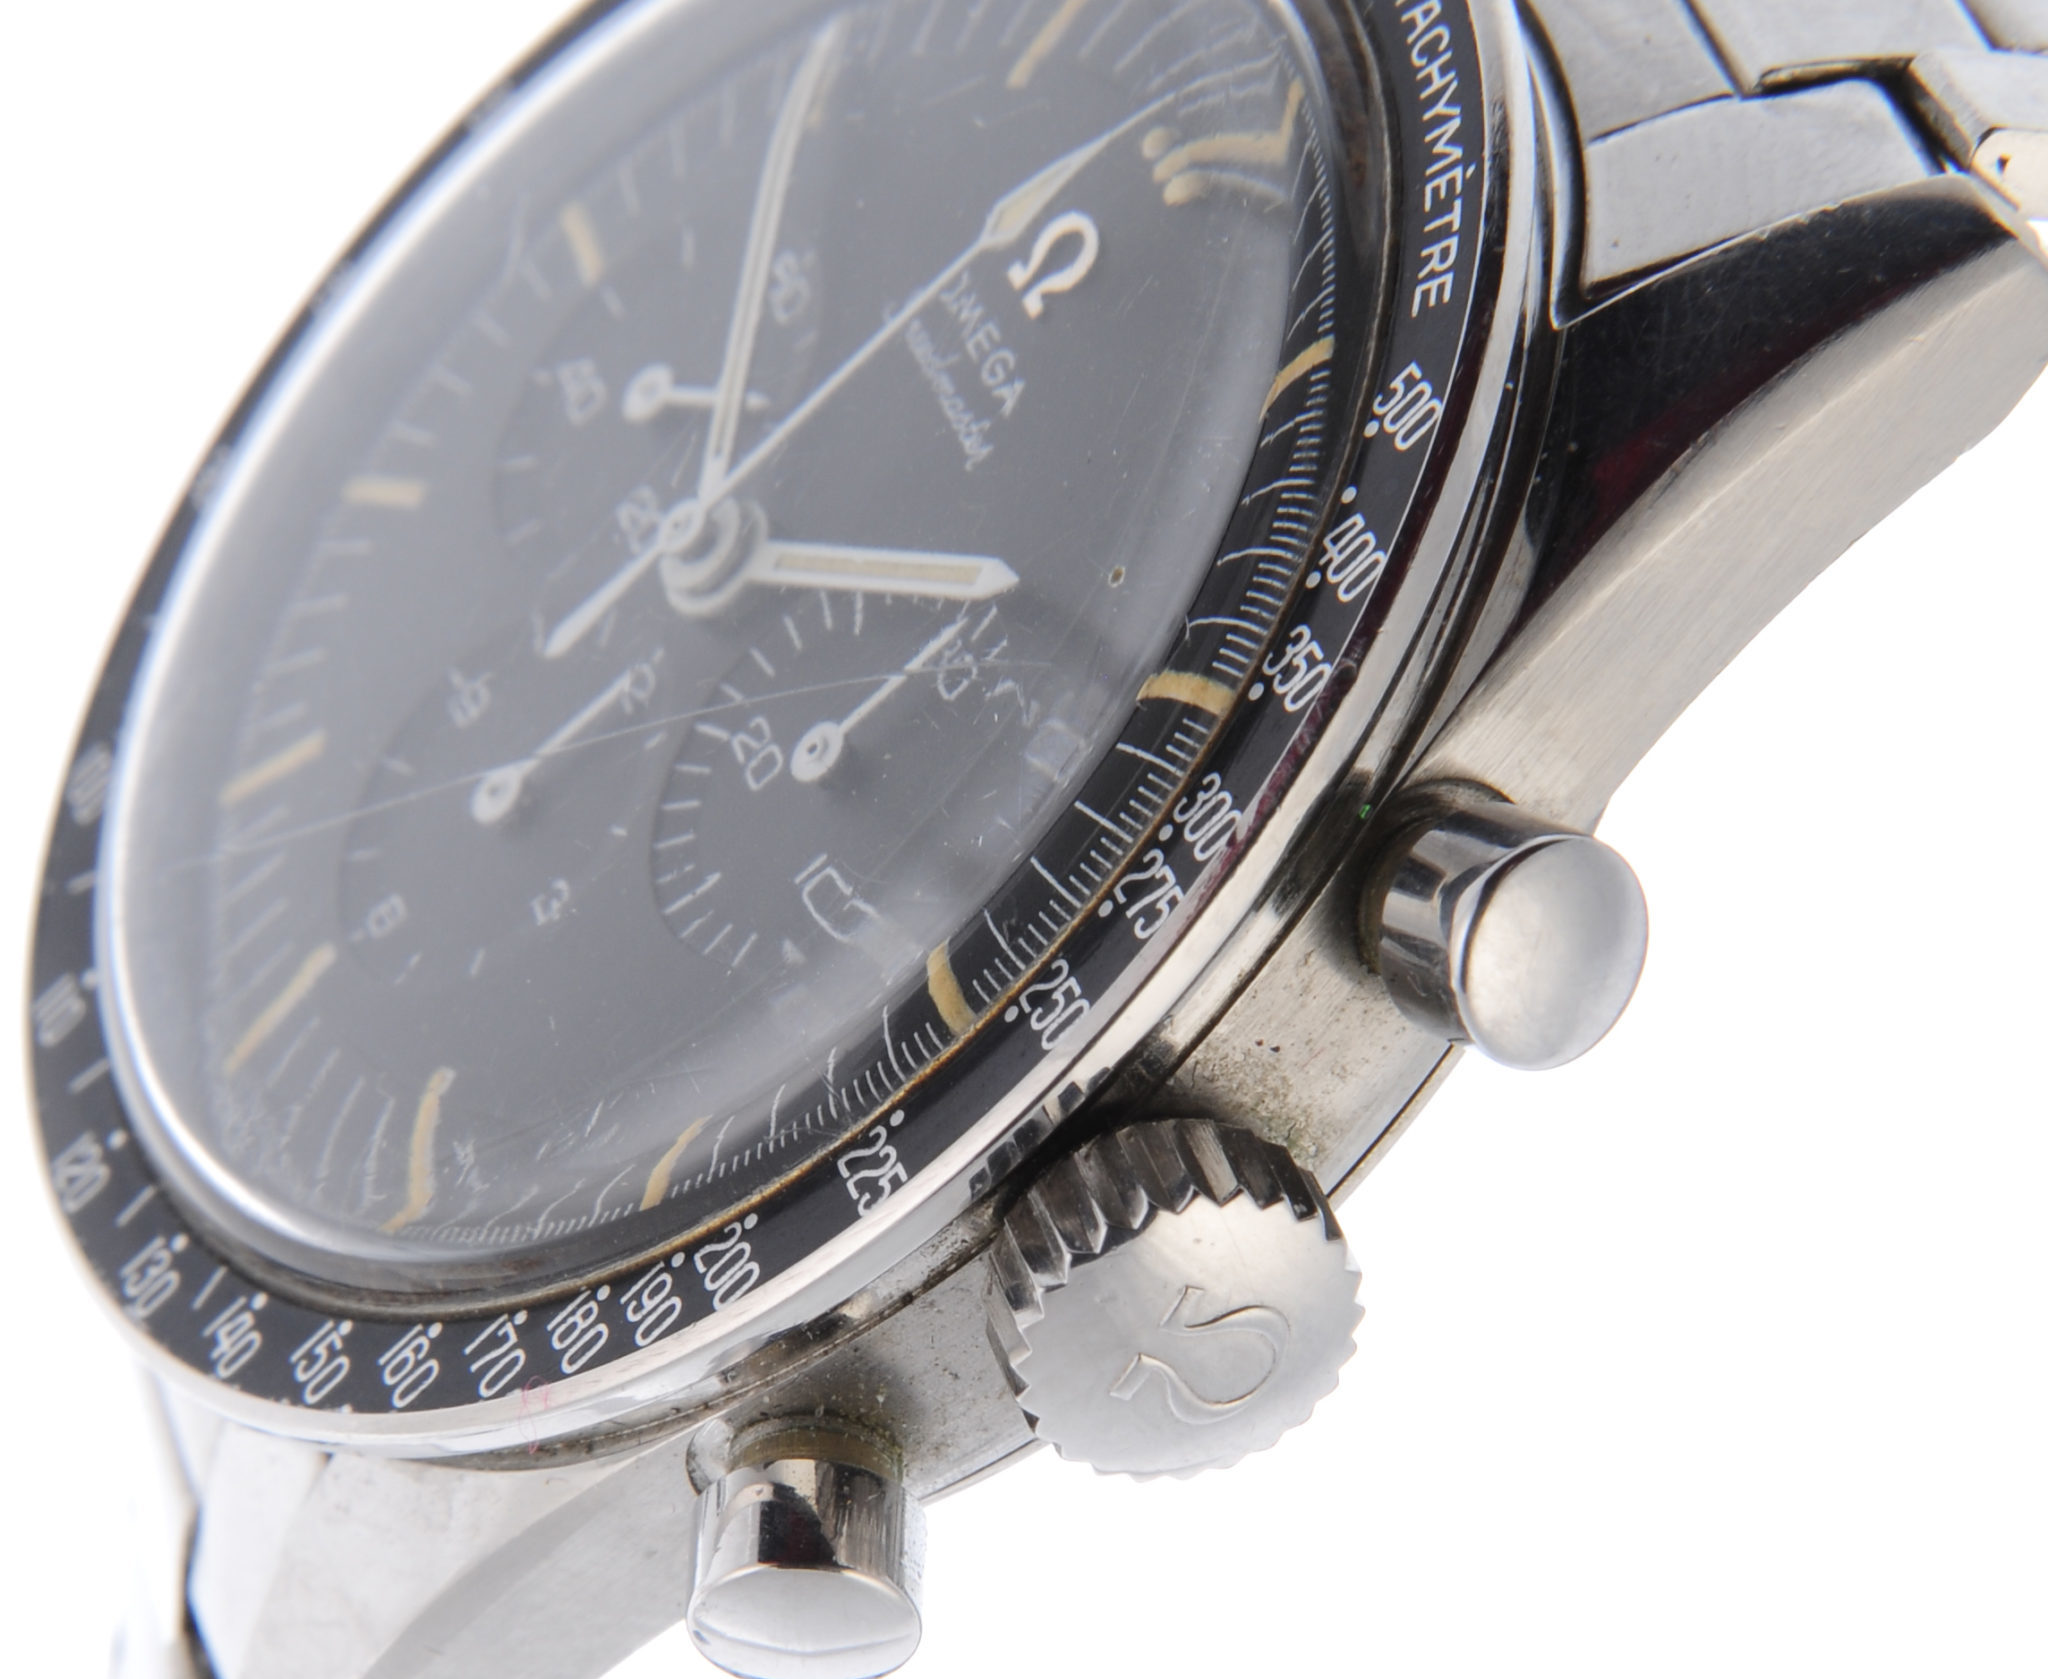 Omega Ed White Sets New Auction Record For Fellows